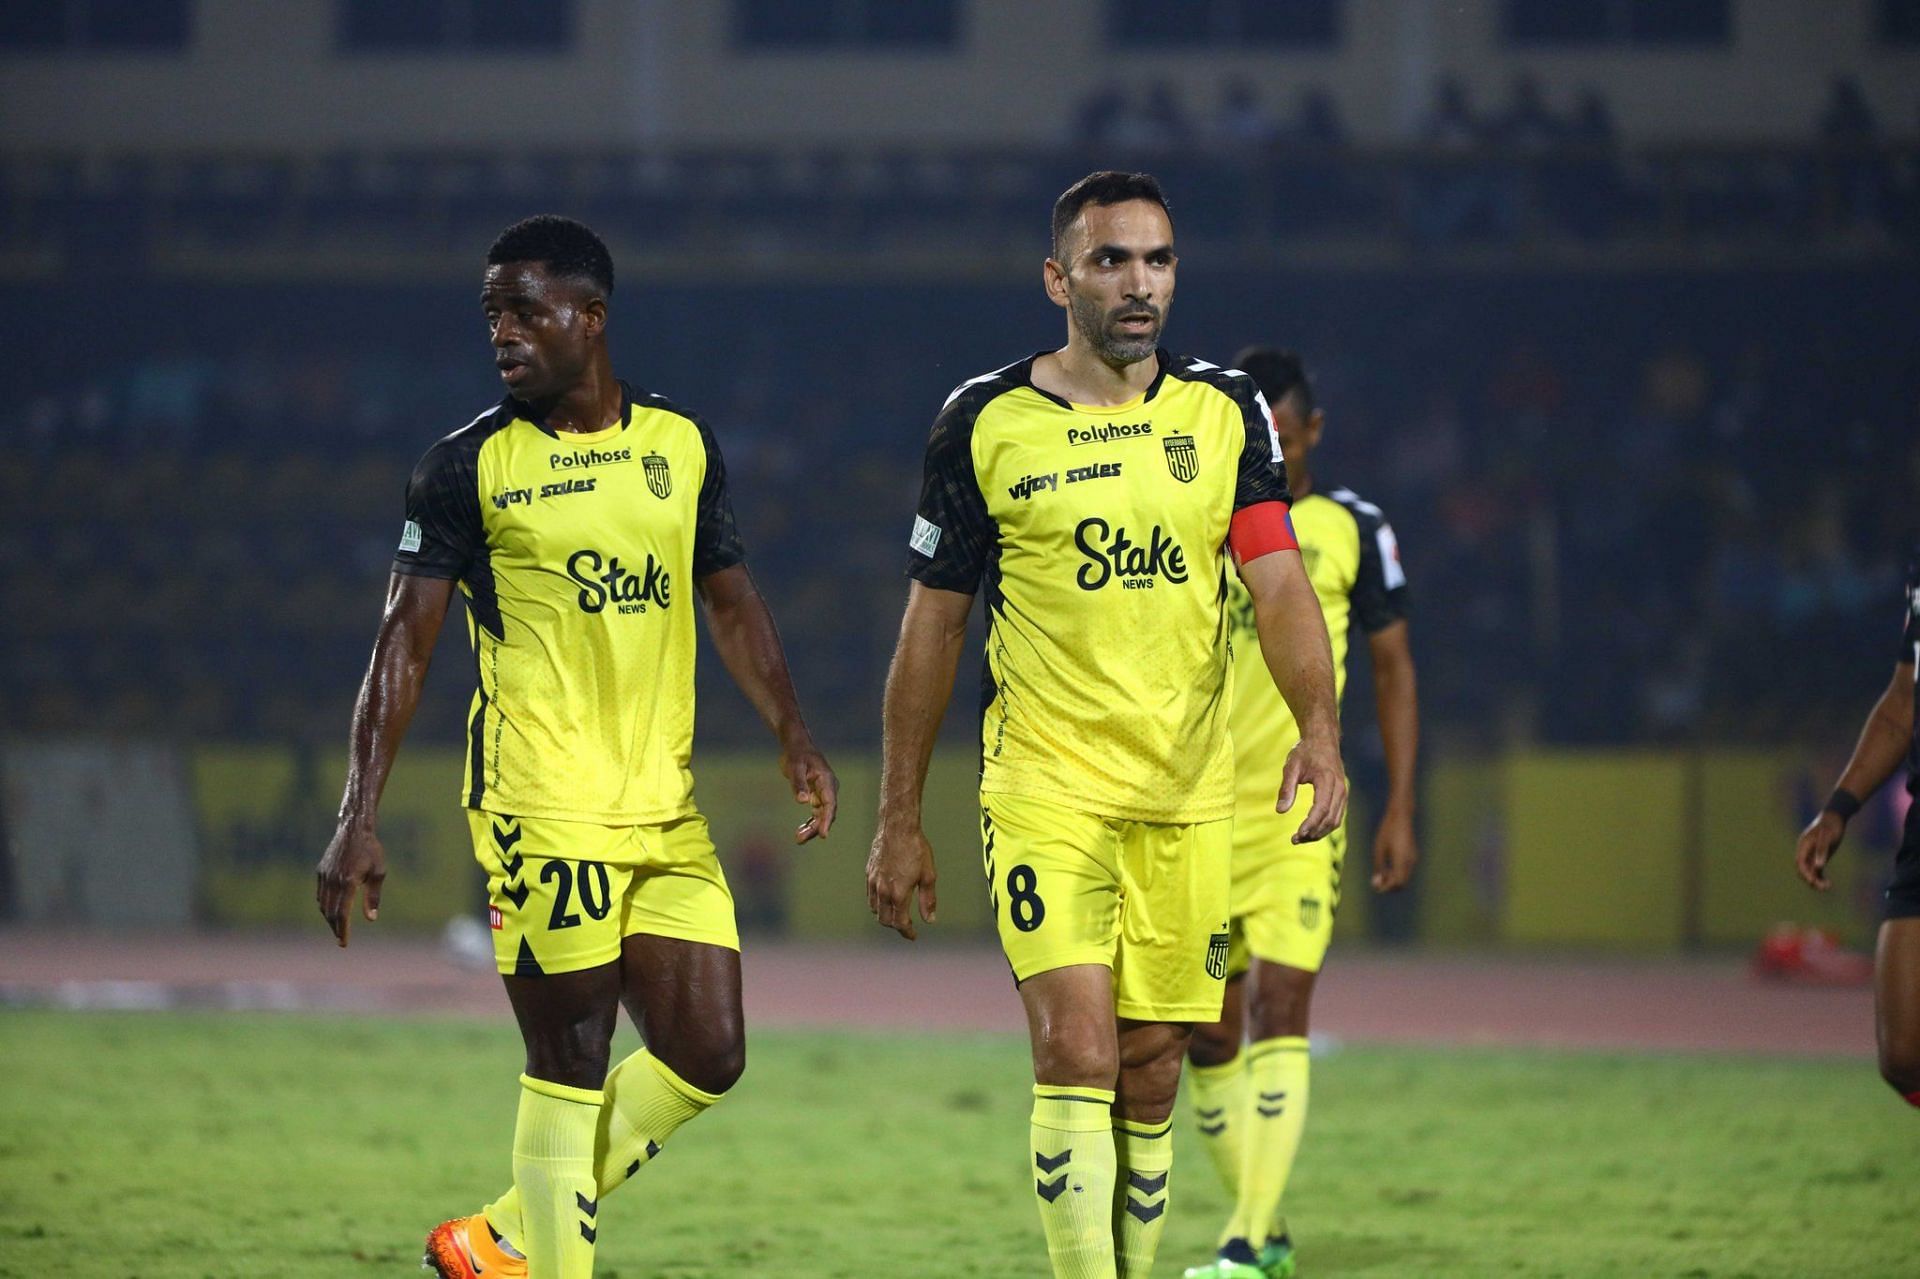 Can Joao Victor and his side bounce back after the narrow defeat against the Kerala Blasters? (Image Courtesy: Hyderabad FC Twitter) 